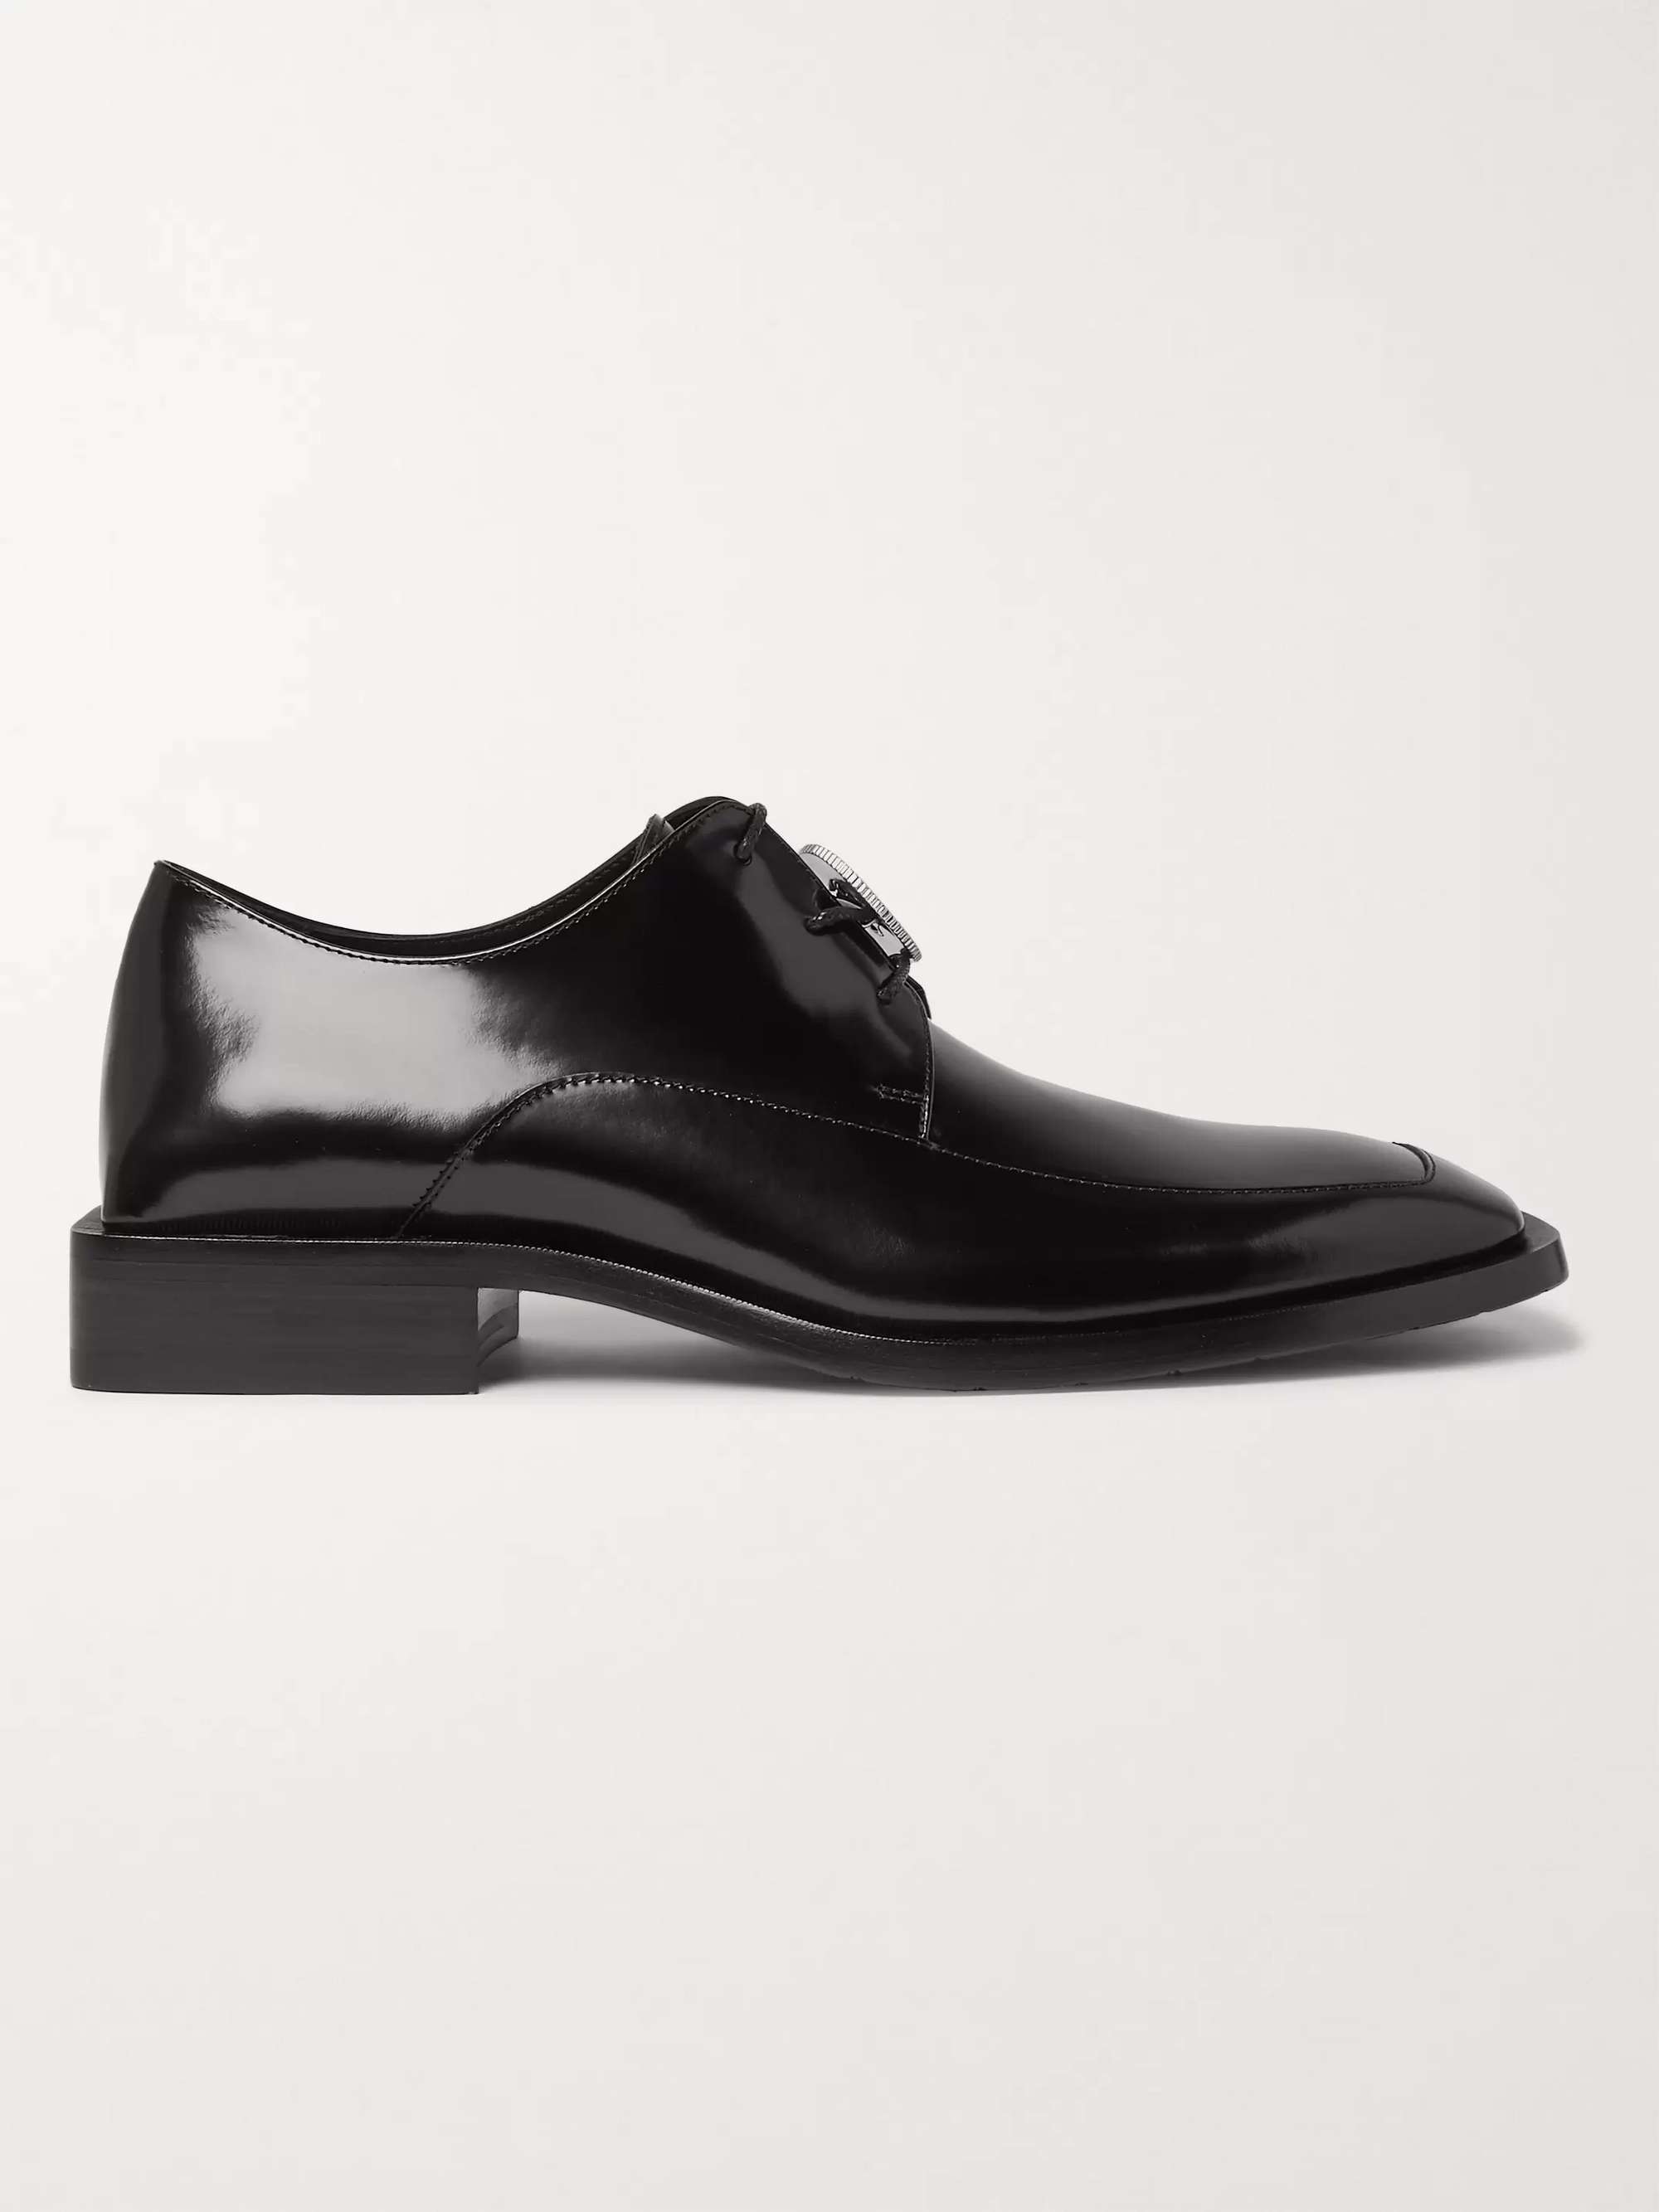 BALENCIAGA Logo-Detailed Patent-Leather Derby Shoes